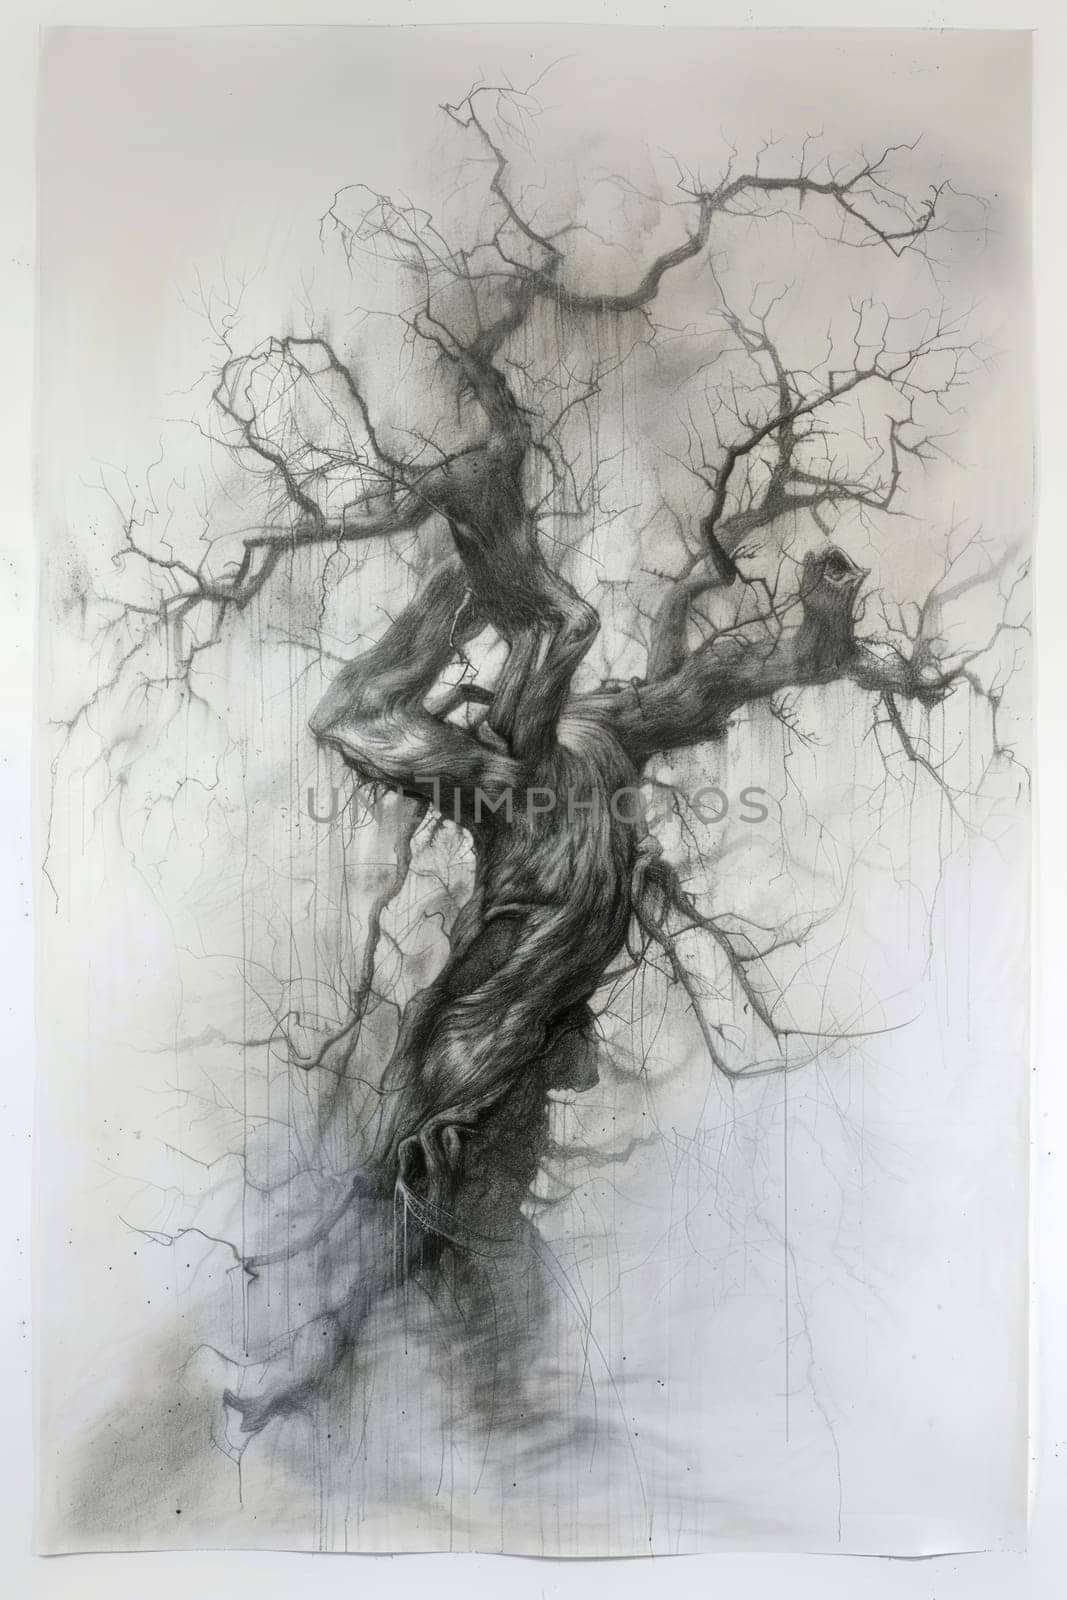 A stylized tree drawn in black pencil on a white background by Lobachad